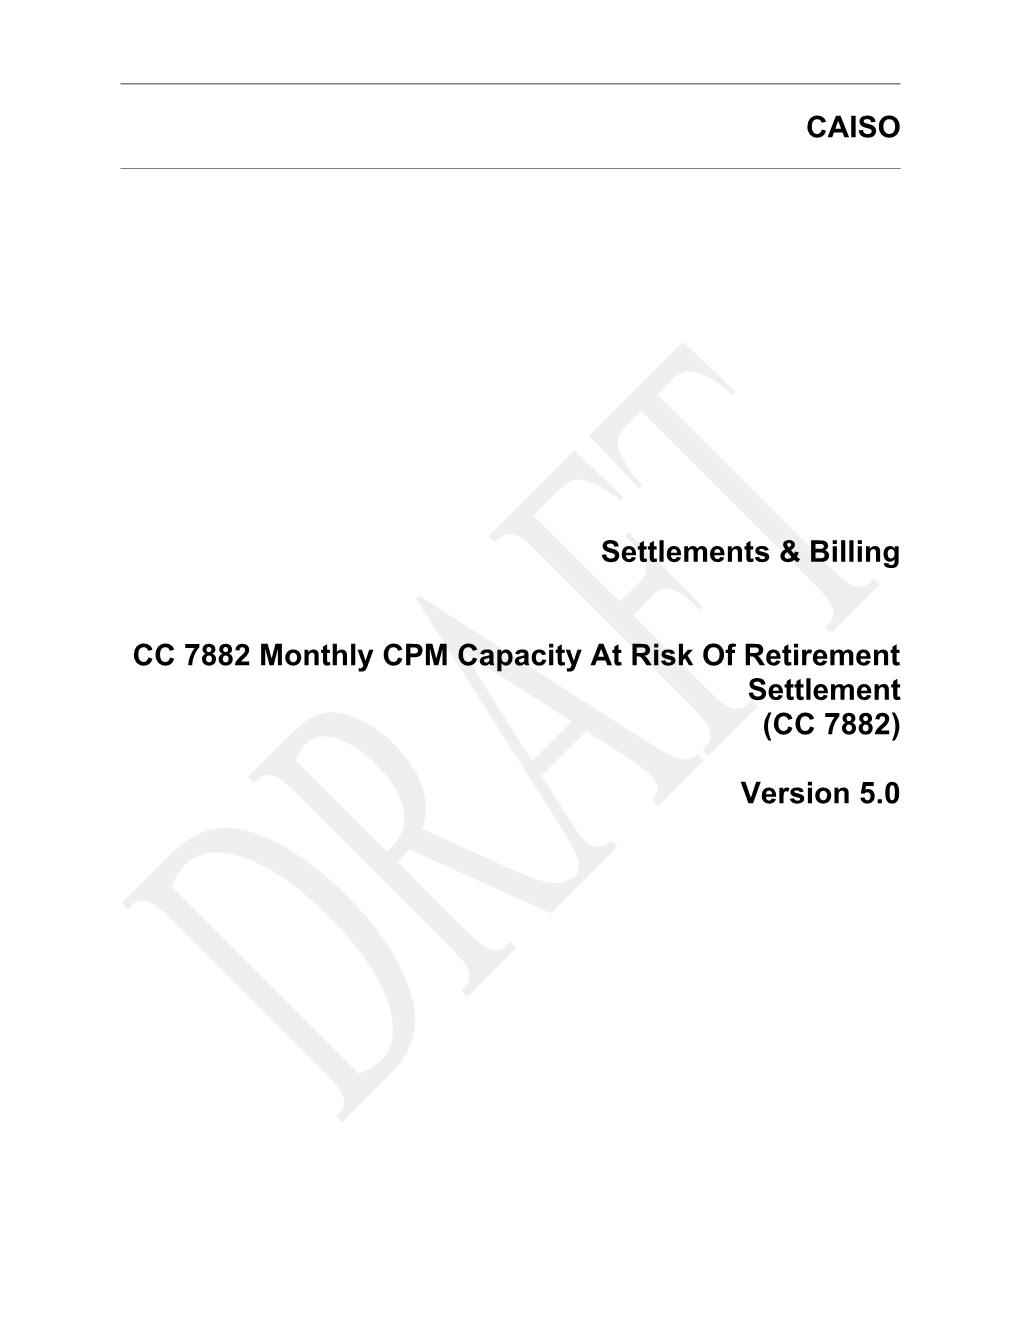 CC 7882 Monthly CPM Capacity at Risk of Retirement Settlement